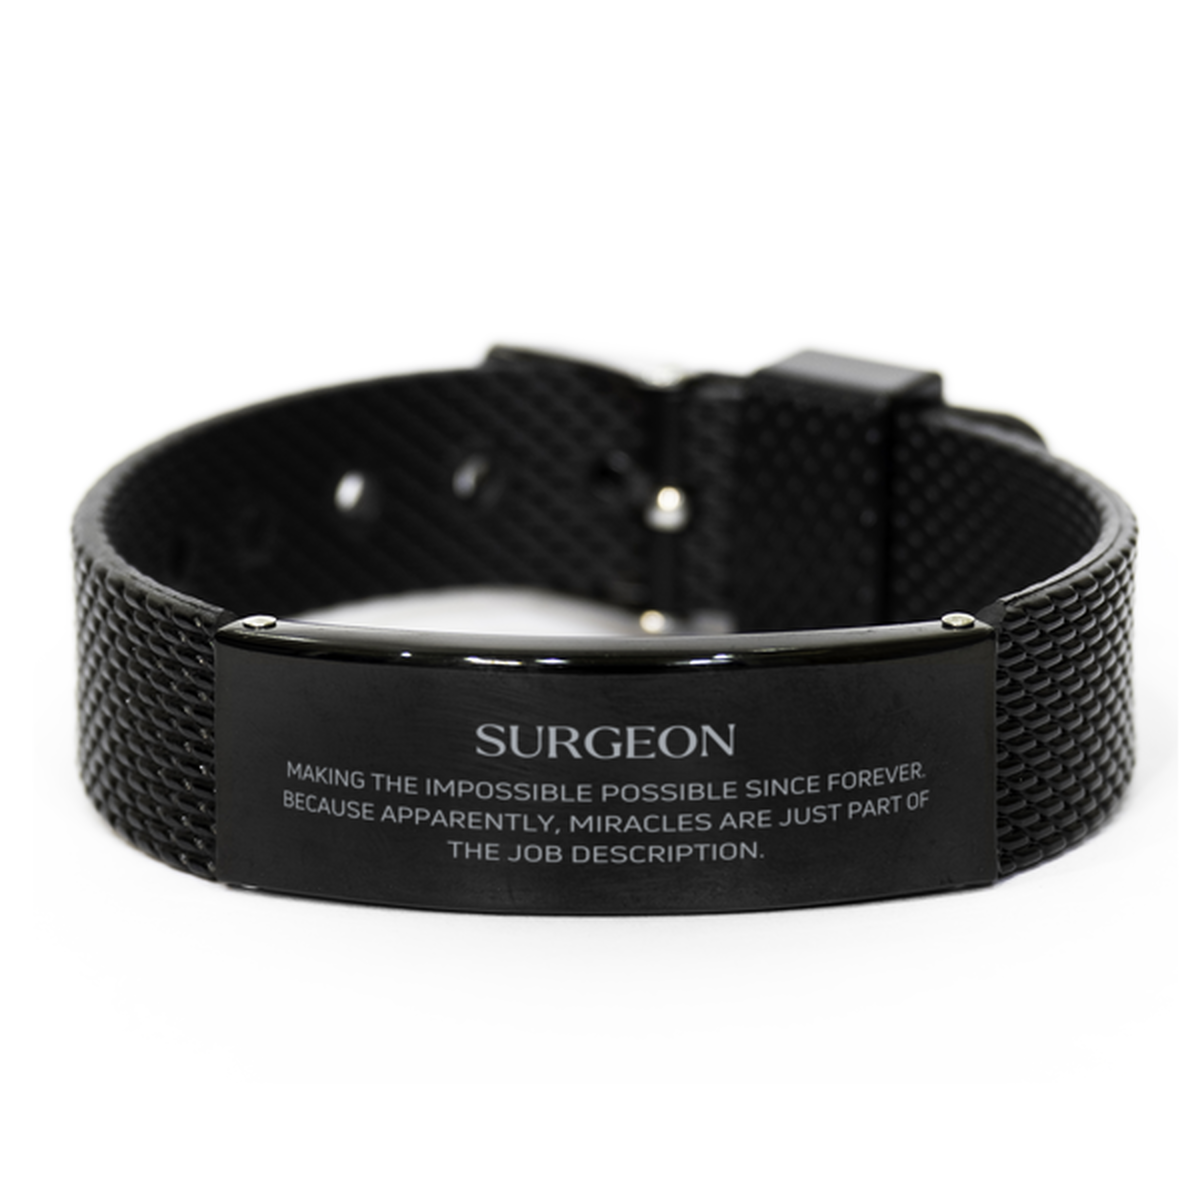 Funny Surgeon Gifts, Miracles are just part of the job description, Inspirational Birthday Black Shark Mesh Bracelet For Surgeon, Men, Women, Coworkers, Friends, Boss